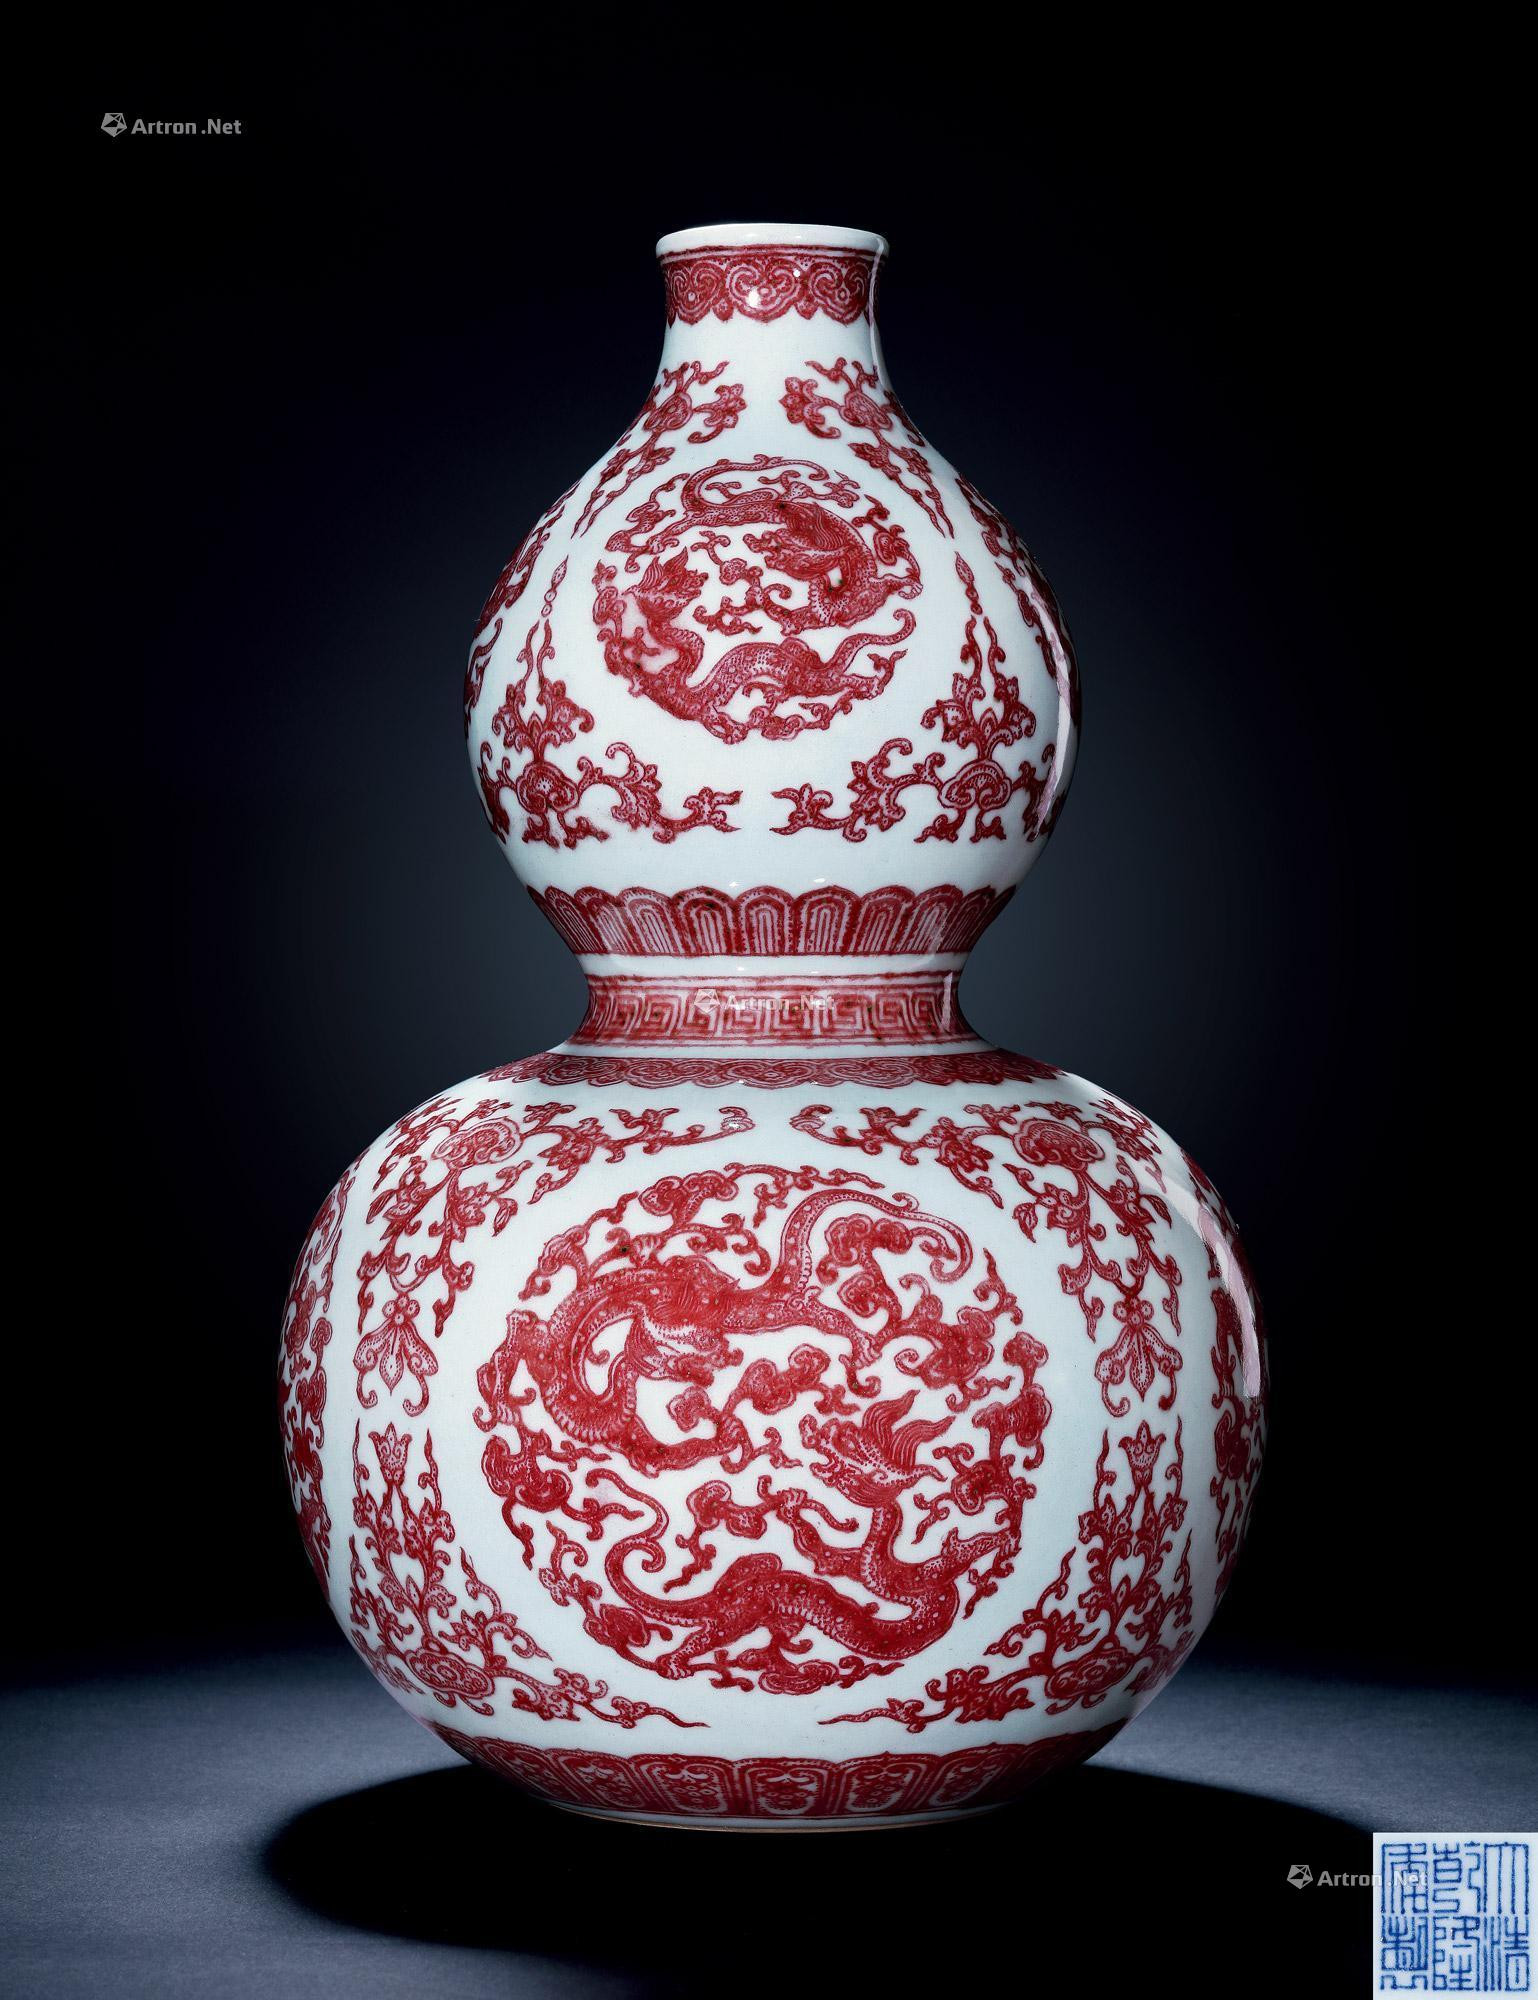 AN IMPORTANT AND EXCEPTIONAL COPPER-RED‘CHI-DRAGON’ DOUBLE-GOURD VASE